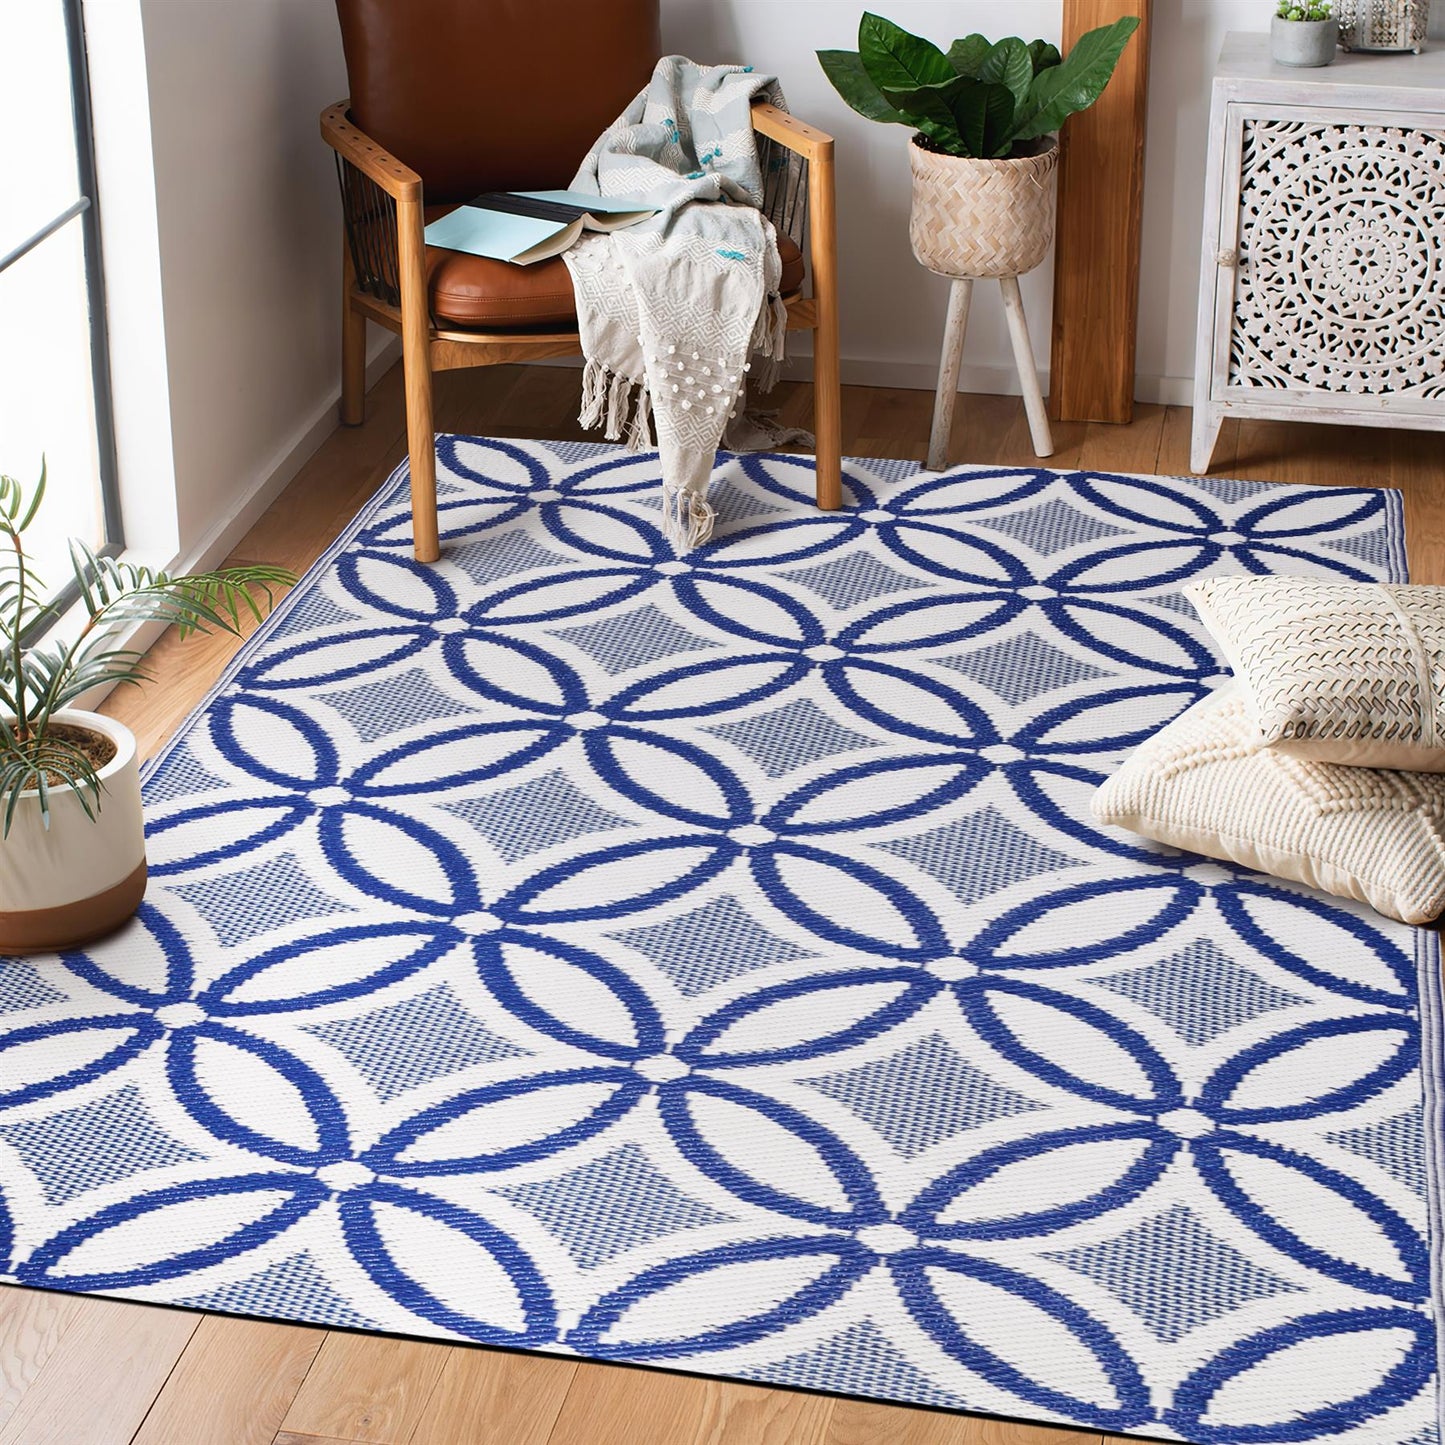 Step Outside in Style with an Outdoor Rug